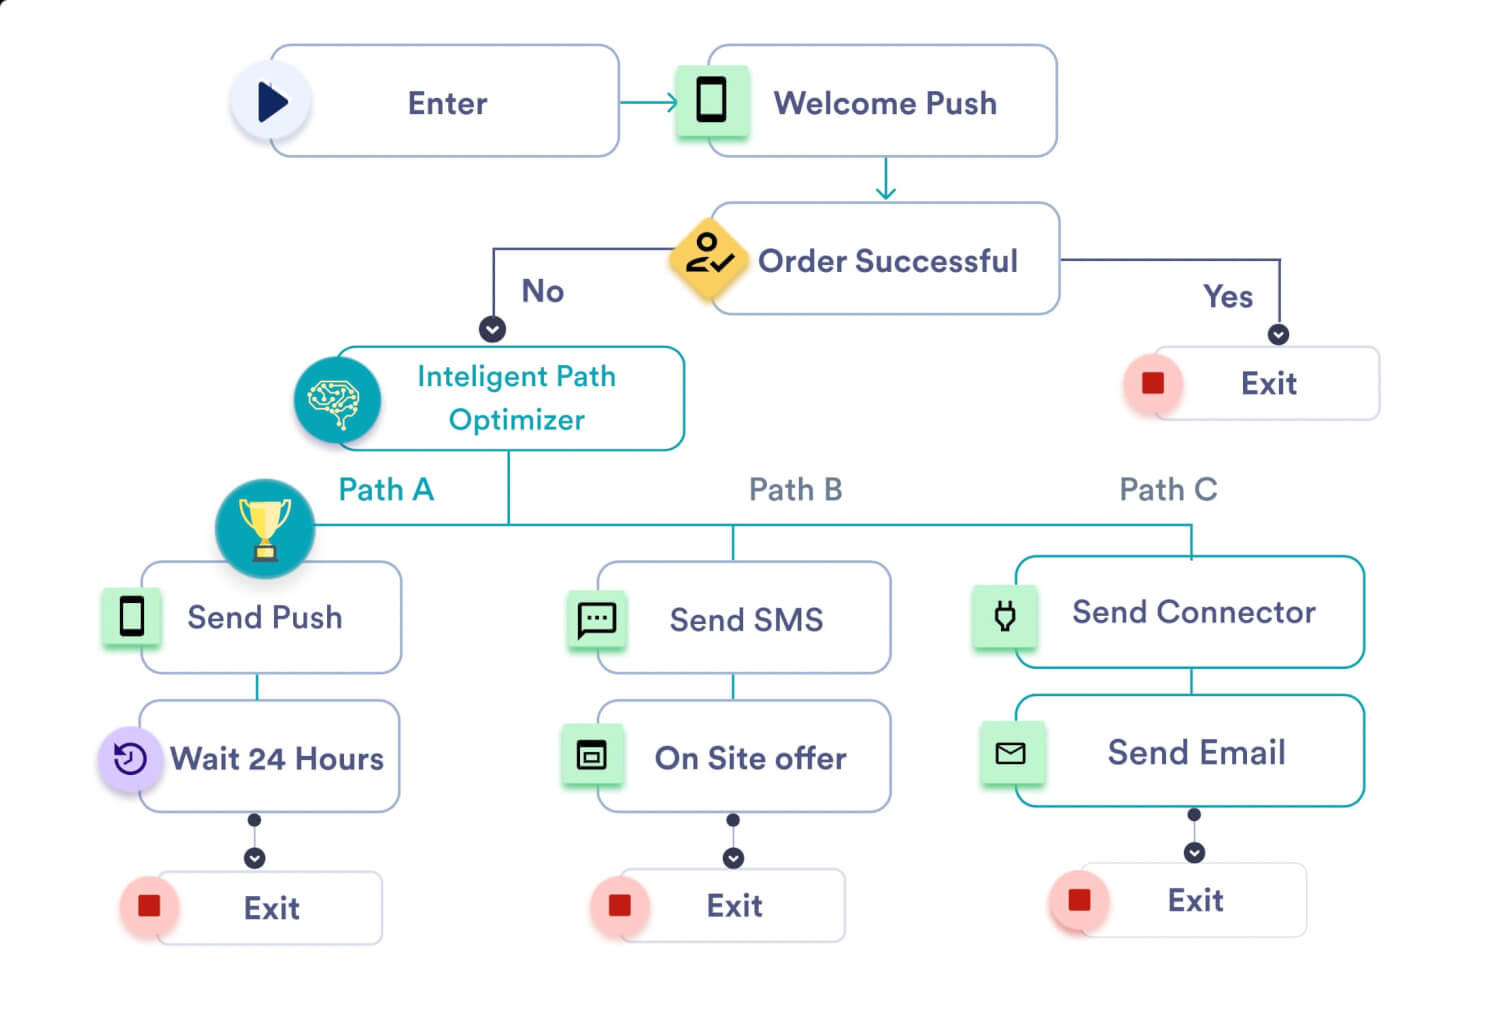 Journey-based email automation